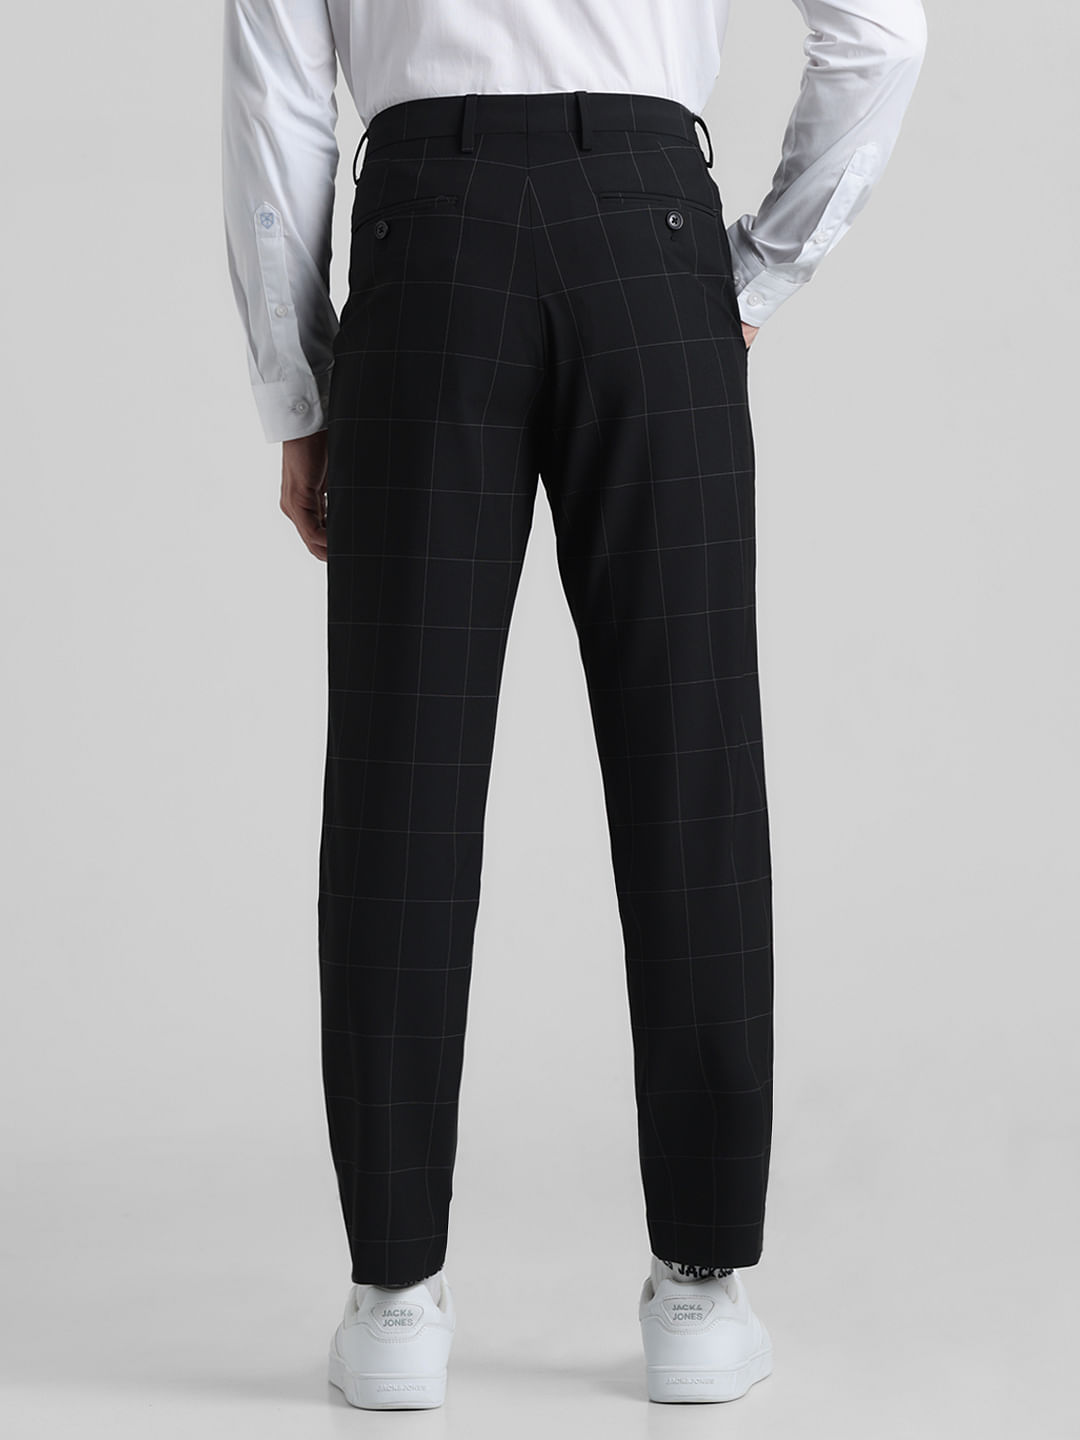 Men's Cropped Trousers black with elastic waistband | FORÀGE